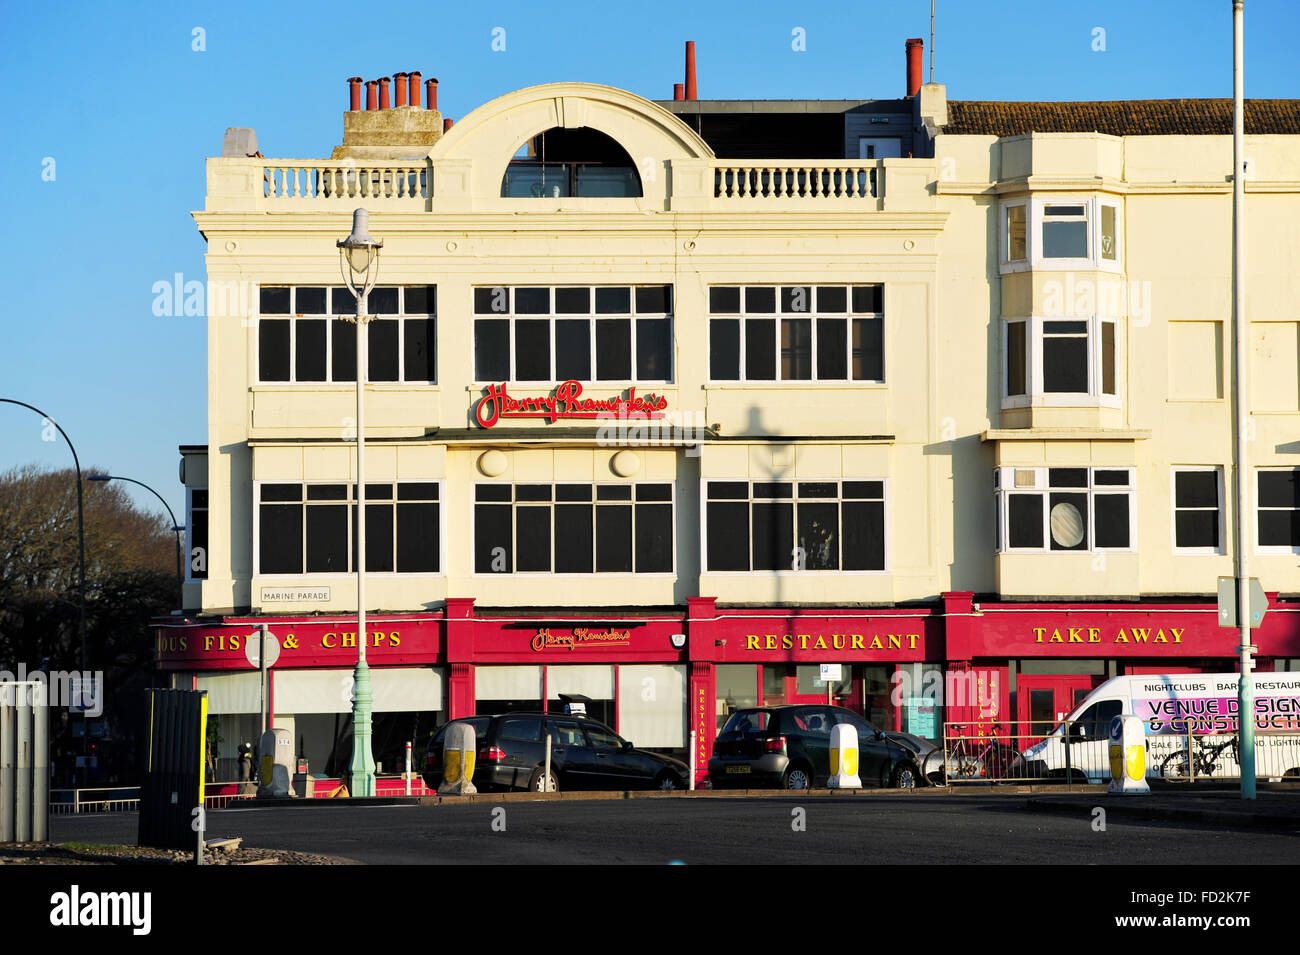 The Harry Ramsden's Fish & Chips restaurant on corner of The Steine and seafront in Brighton Stock Photo